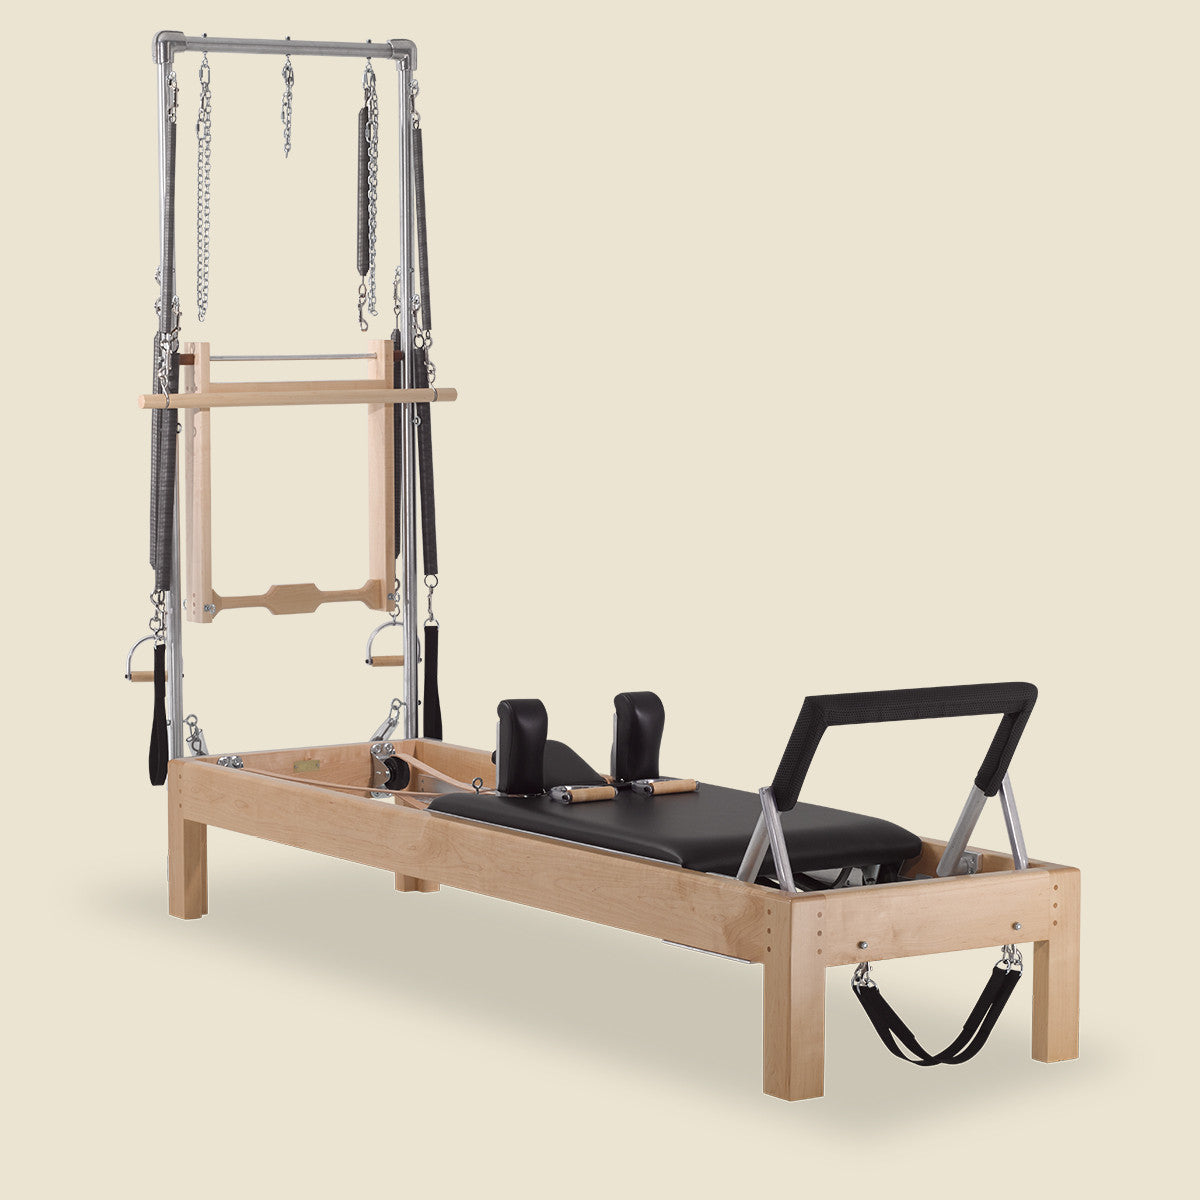 The Gratz Reformer is the Apparatus of the Month… aging backwards